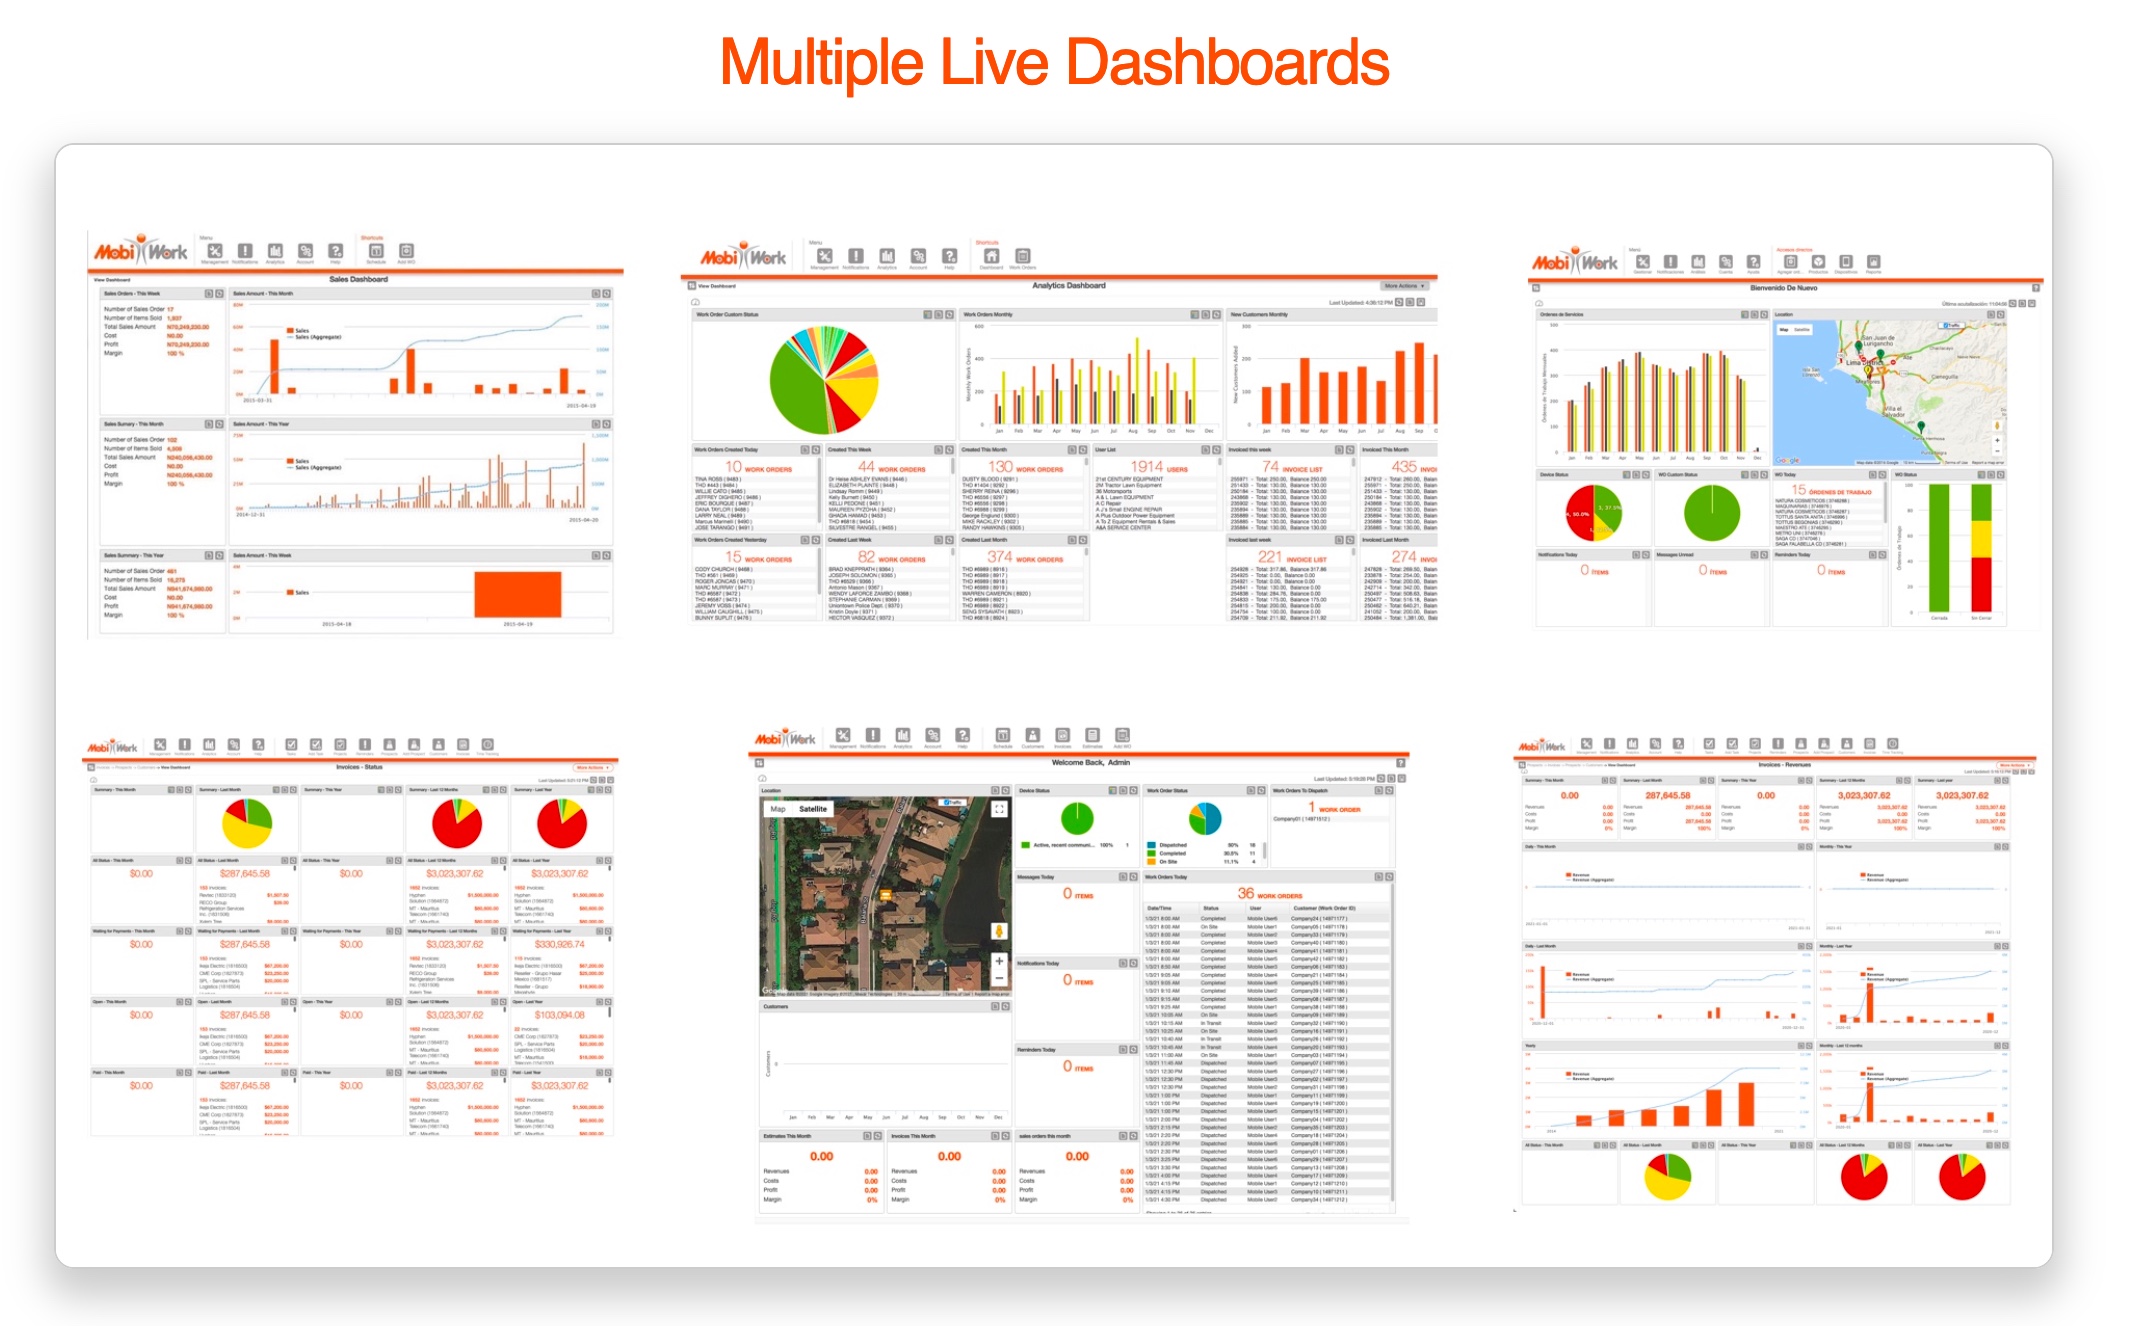 Real time visibility and insight to monitor and improve performance.